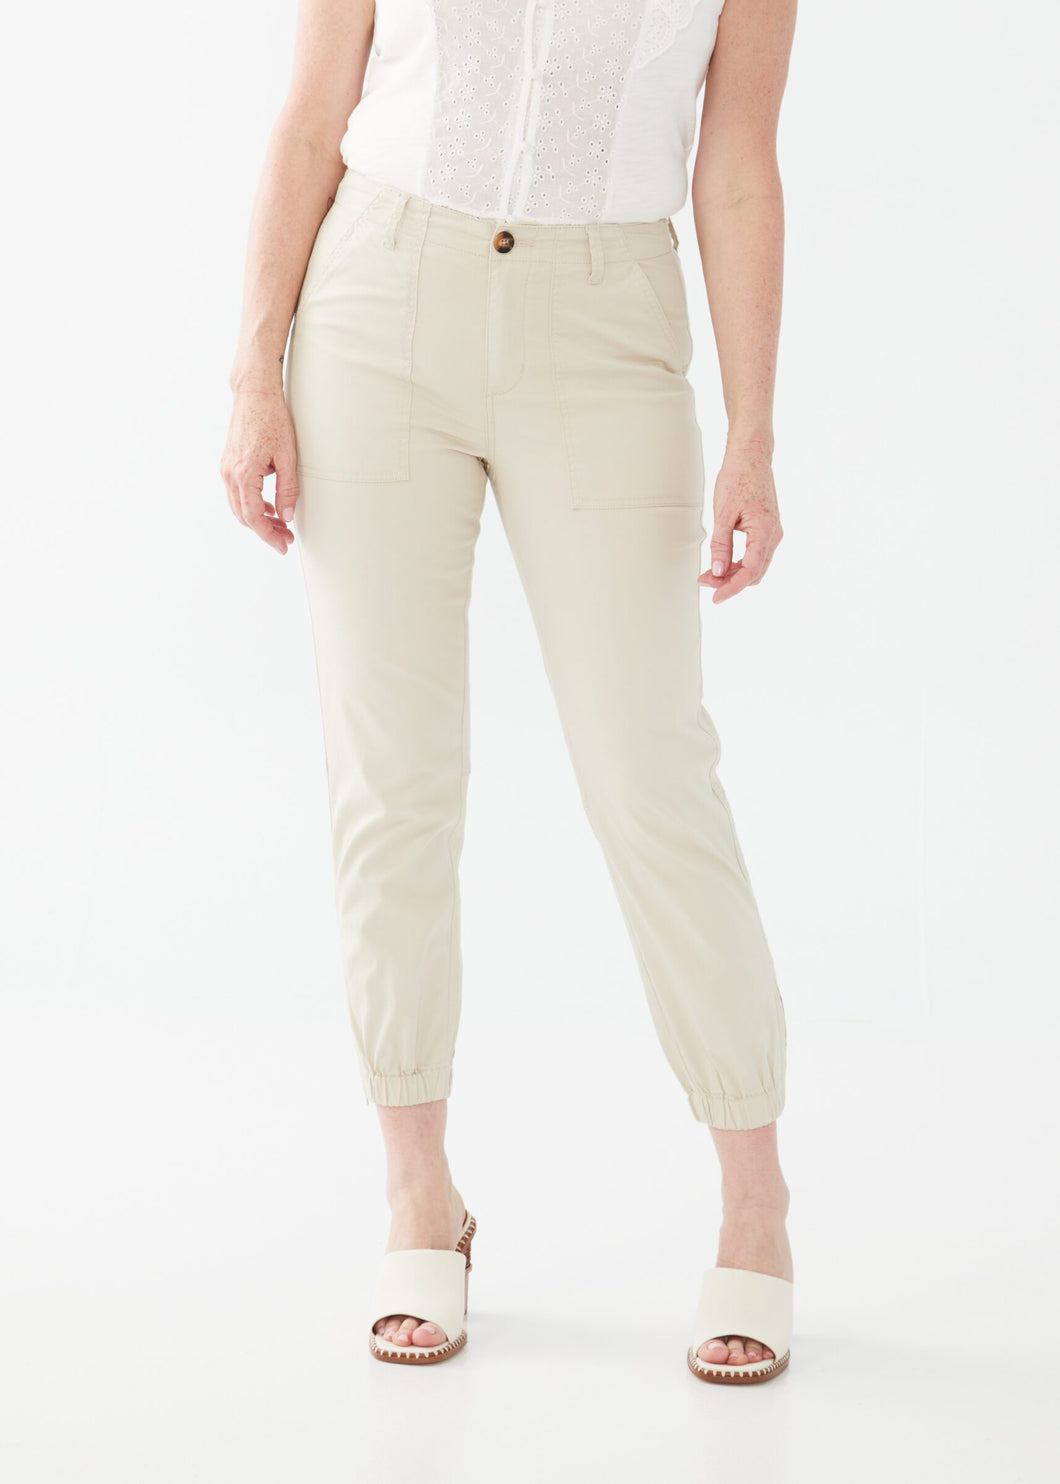 FDJ TENCEL CARGO OLIVIA SLIM UTILITY ANKLE PANTS IN OYSTER SHELL